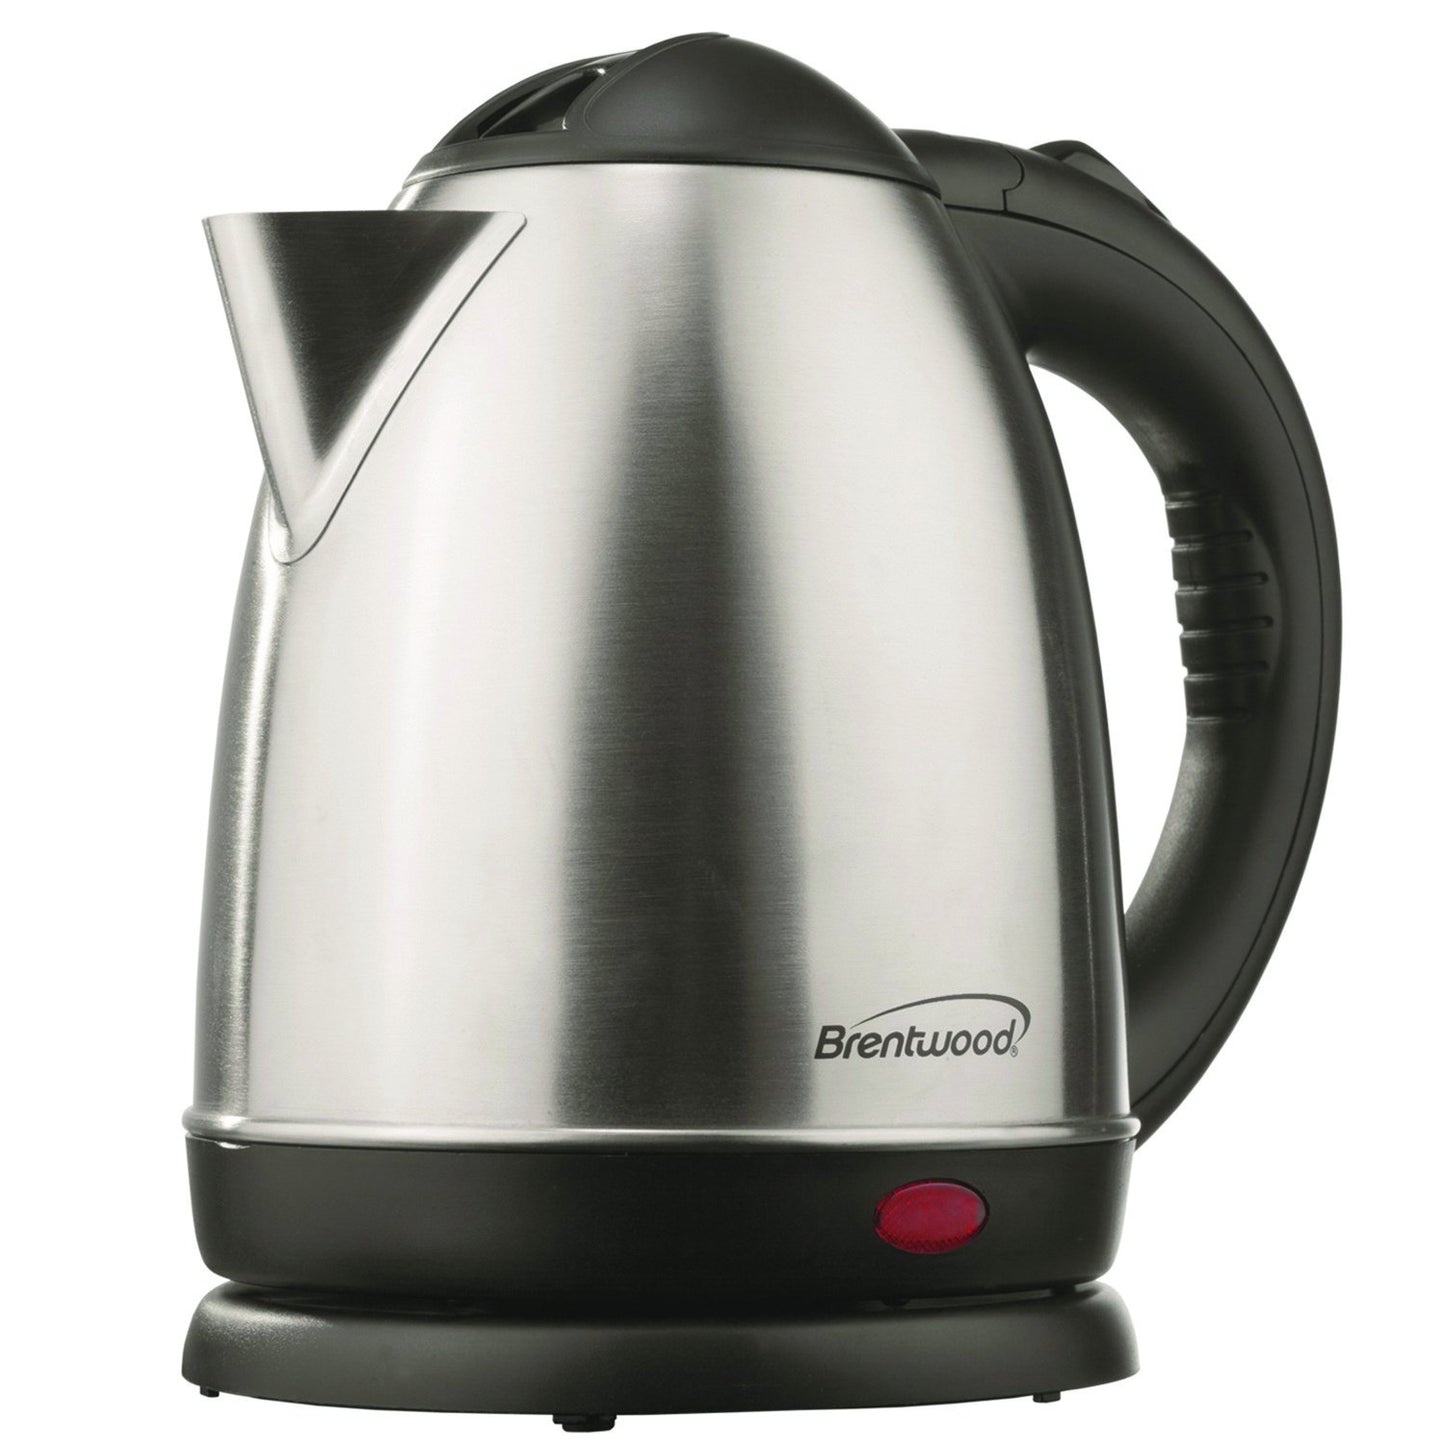 Brentwood Appl. KT-1780 1.5L Stainless Steel Cordless Electric Kettle